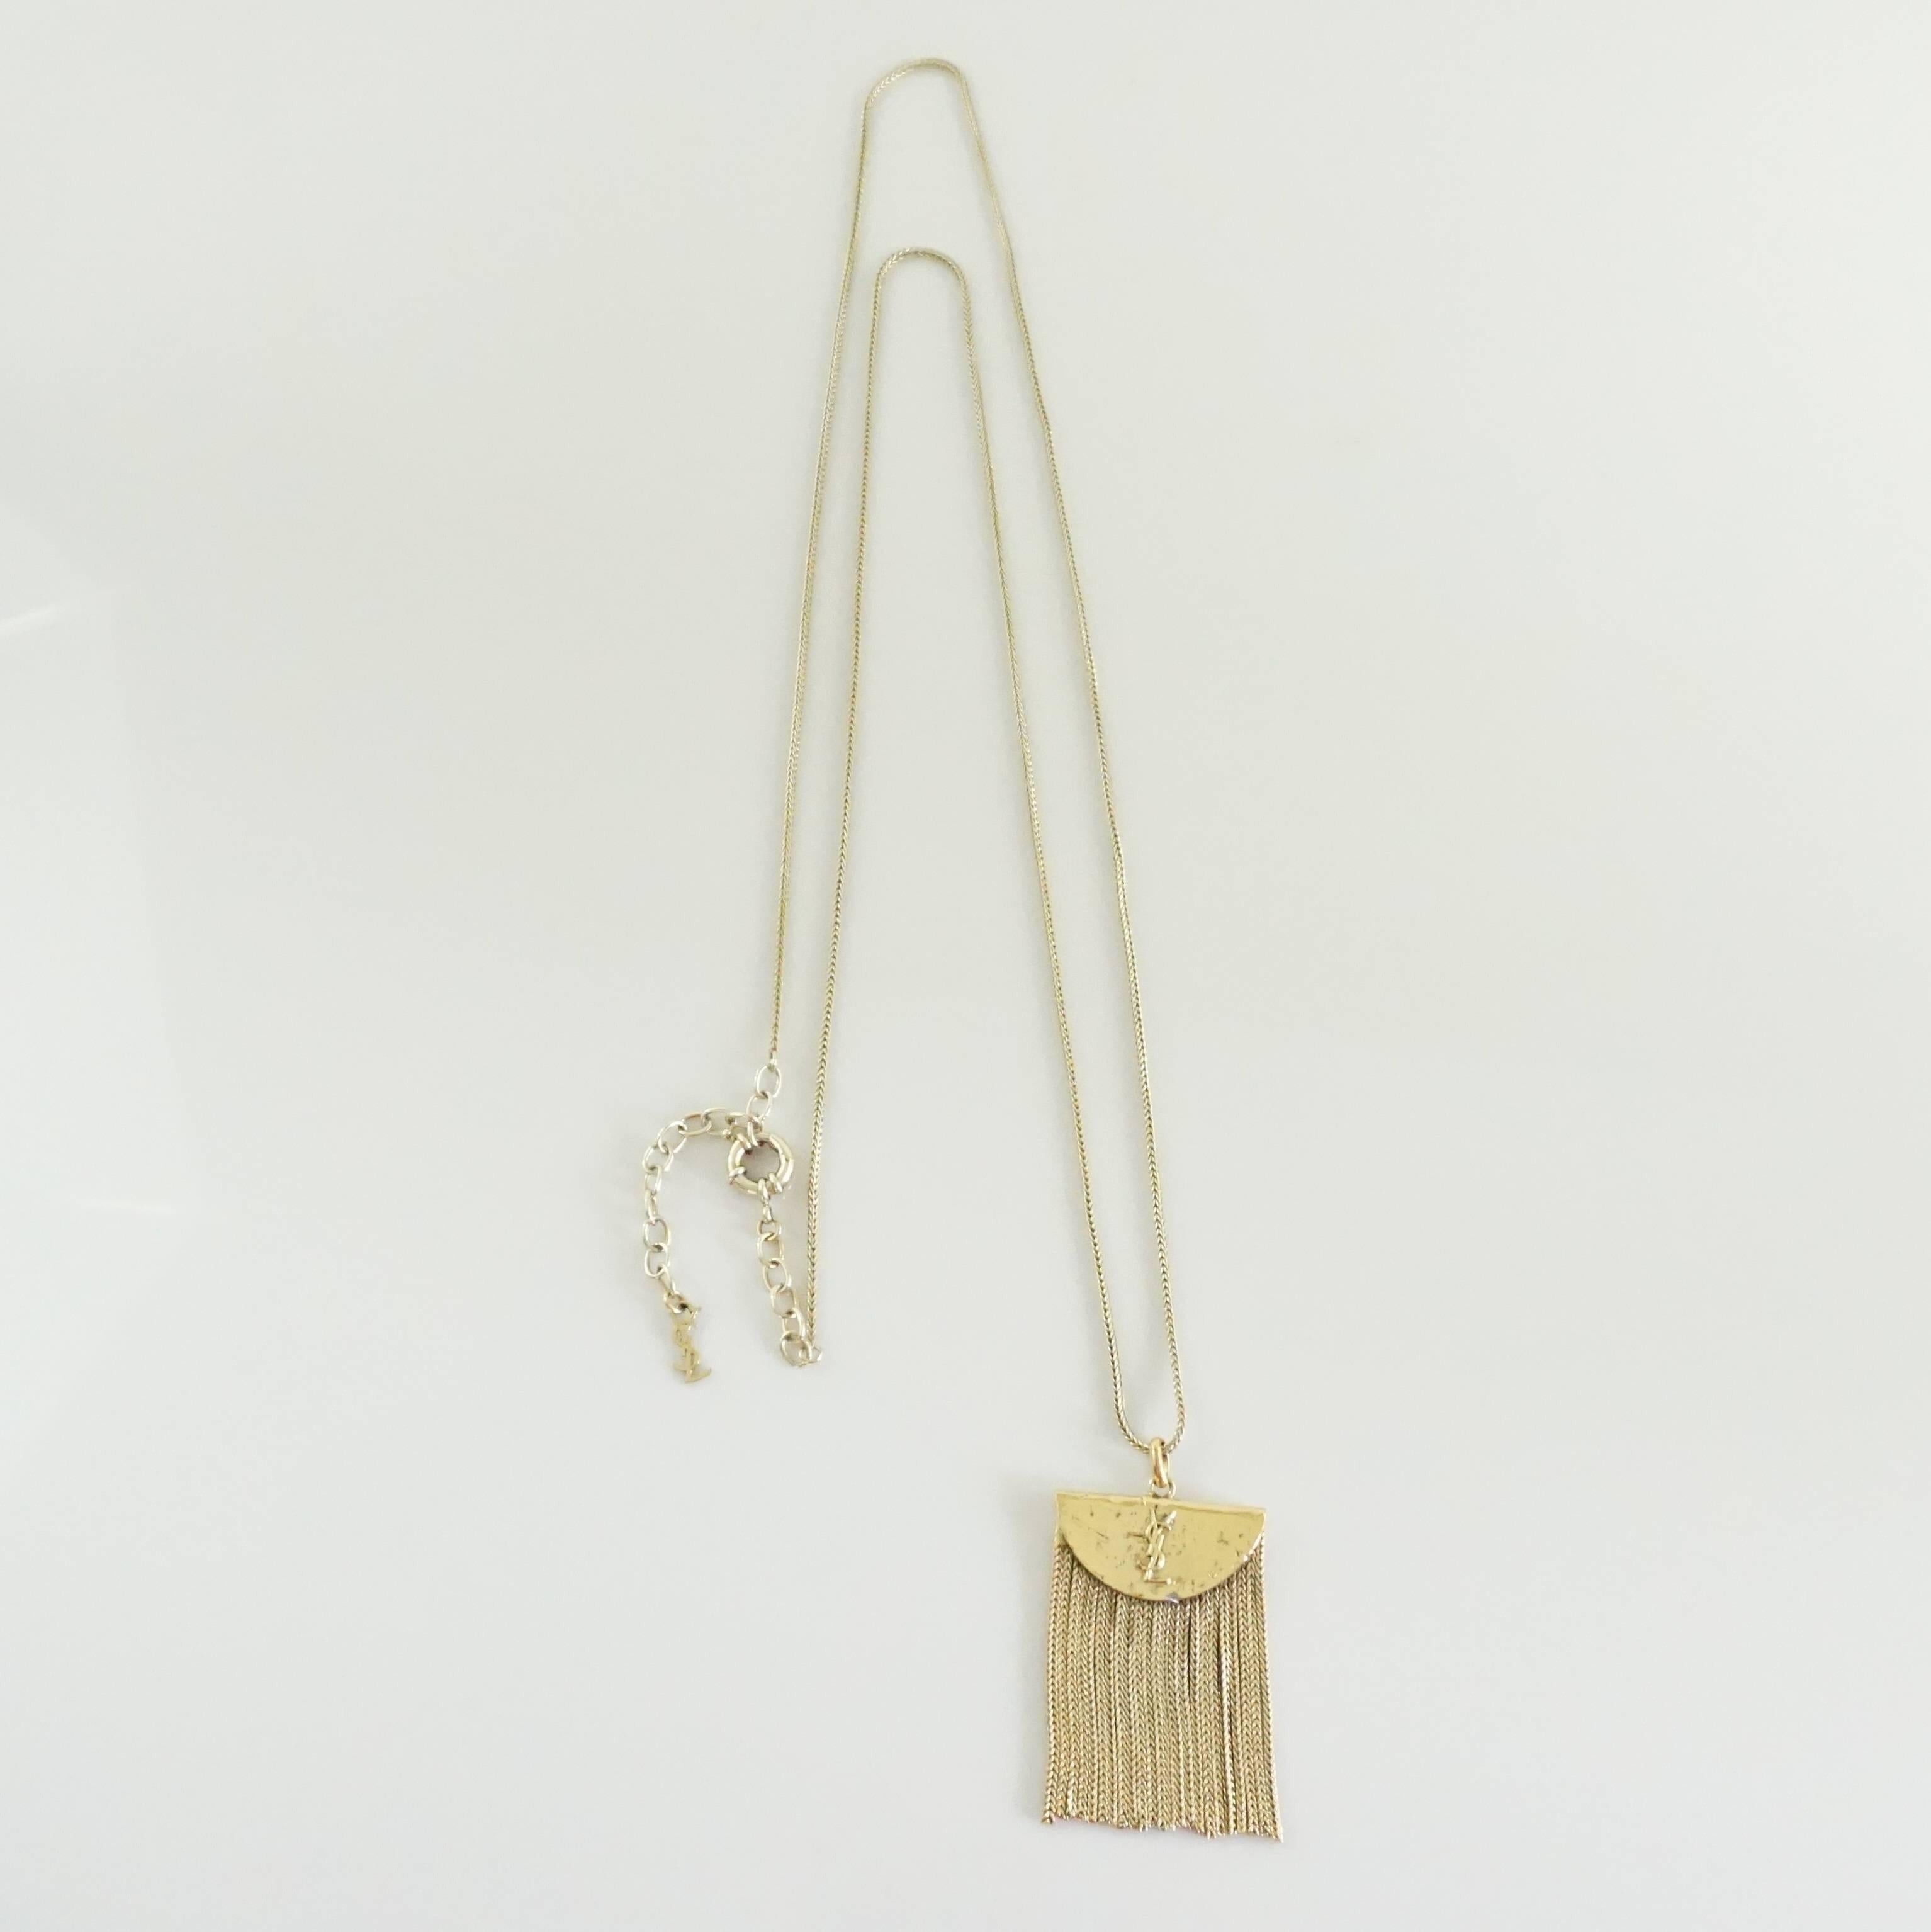 This Yves Saint Laurent long pendant necklace is a golden brass color. The pendant is a textured semi-circle with "YSL" embossed and a fringe hanging from it. This necklace is in excellent condition with some wear to the closure.